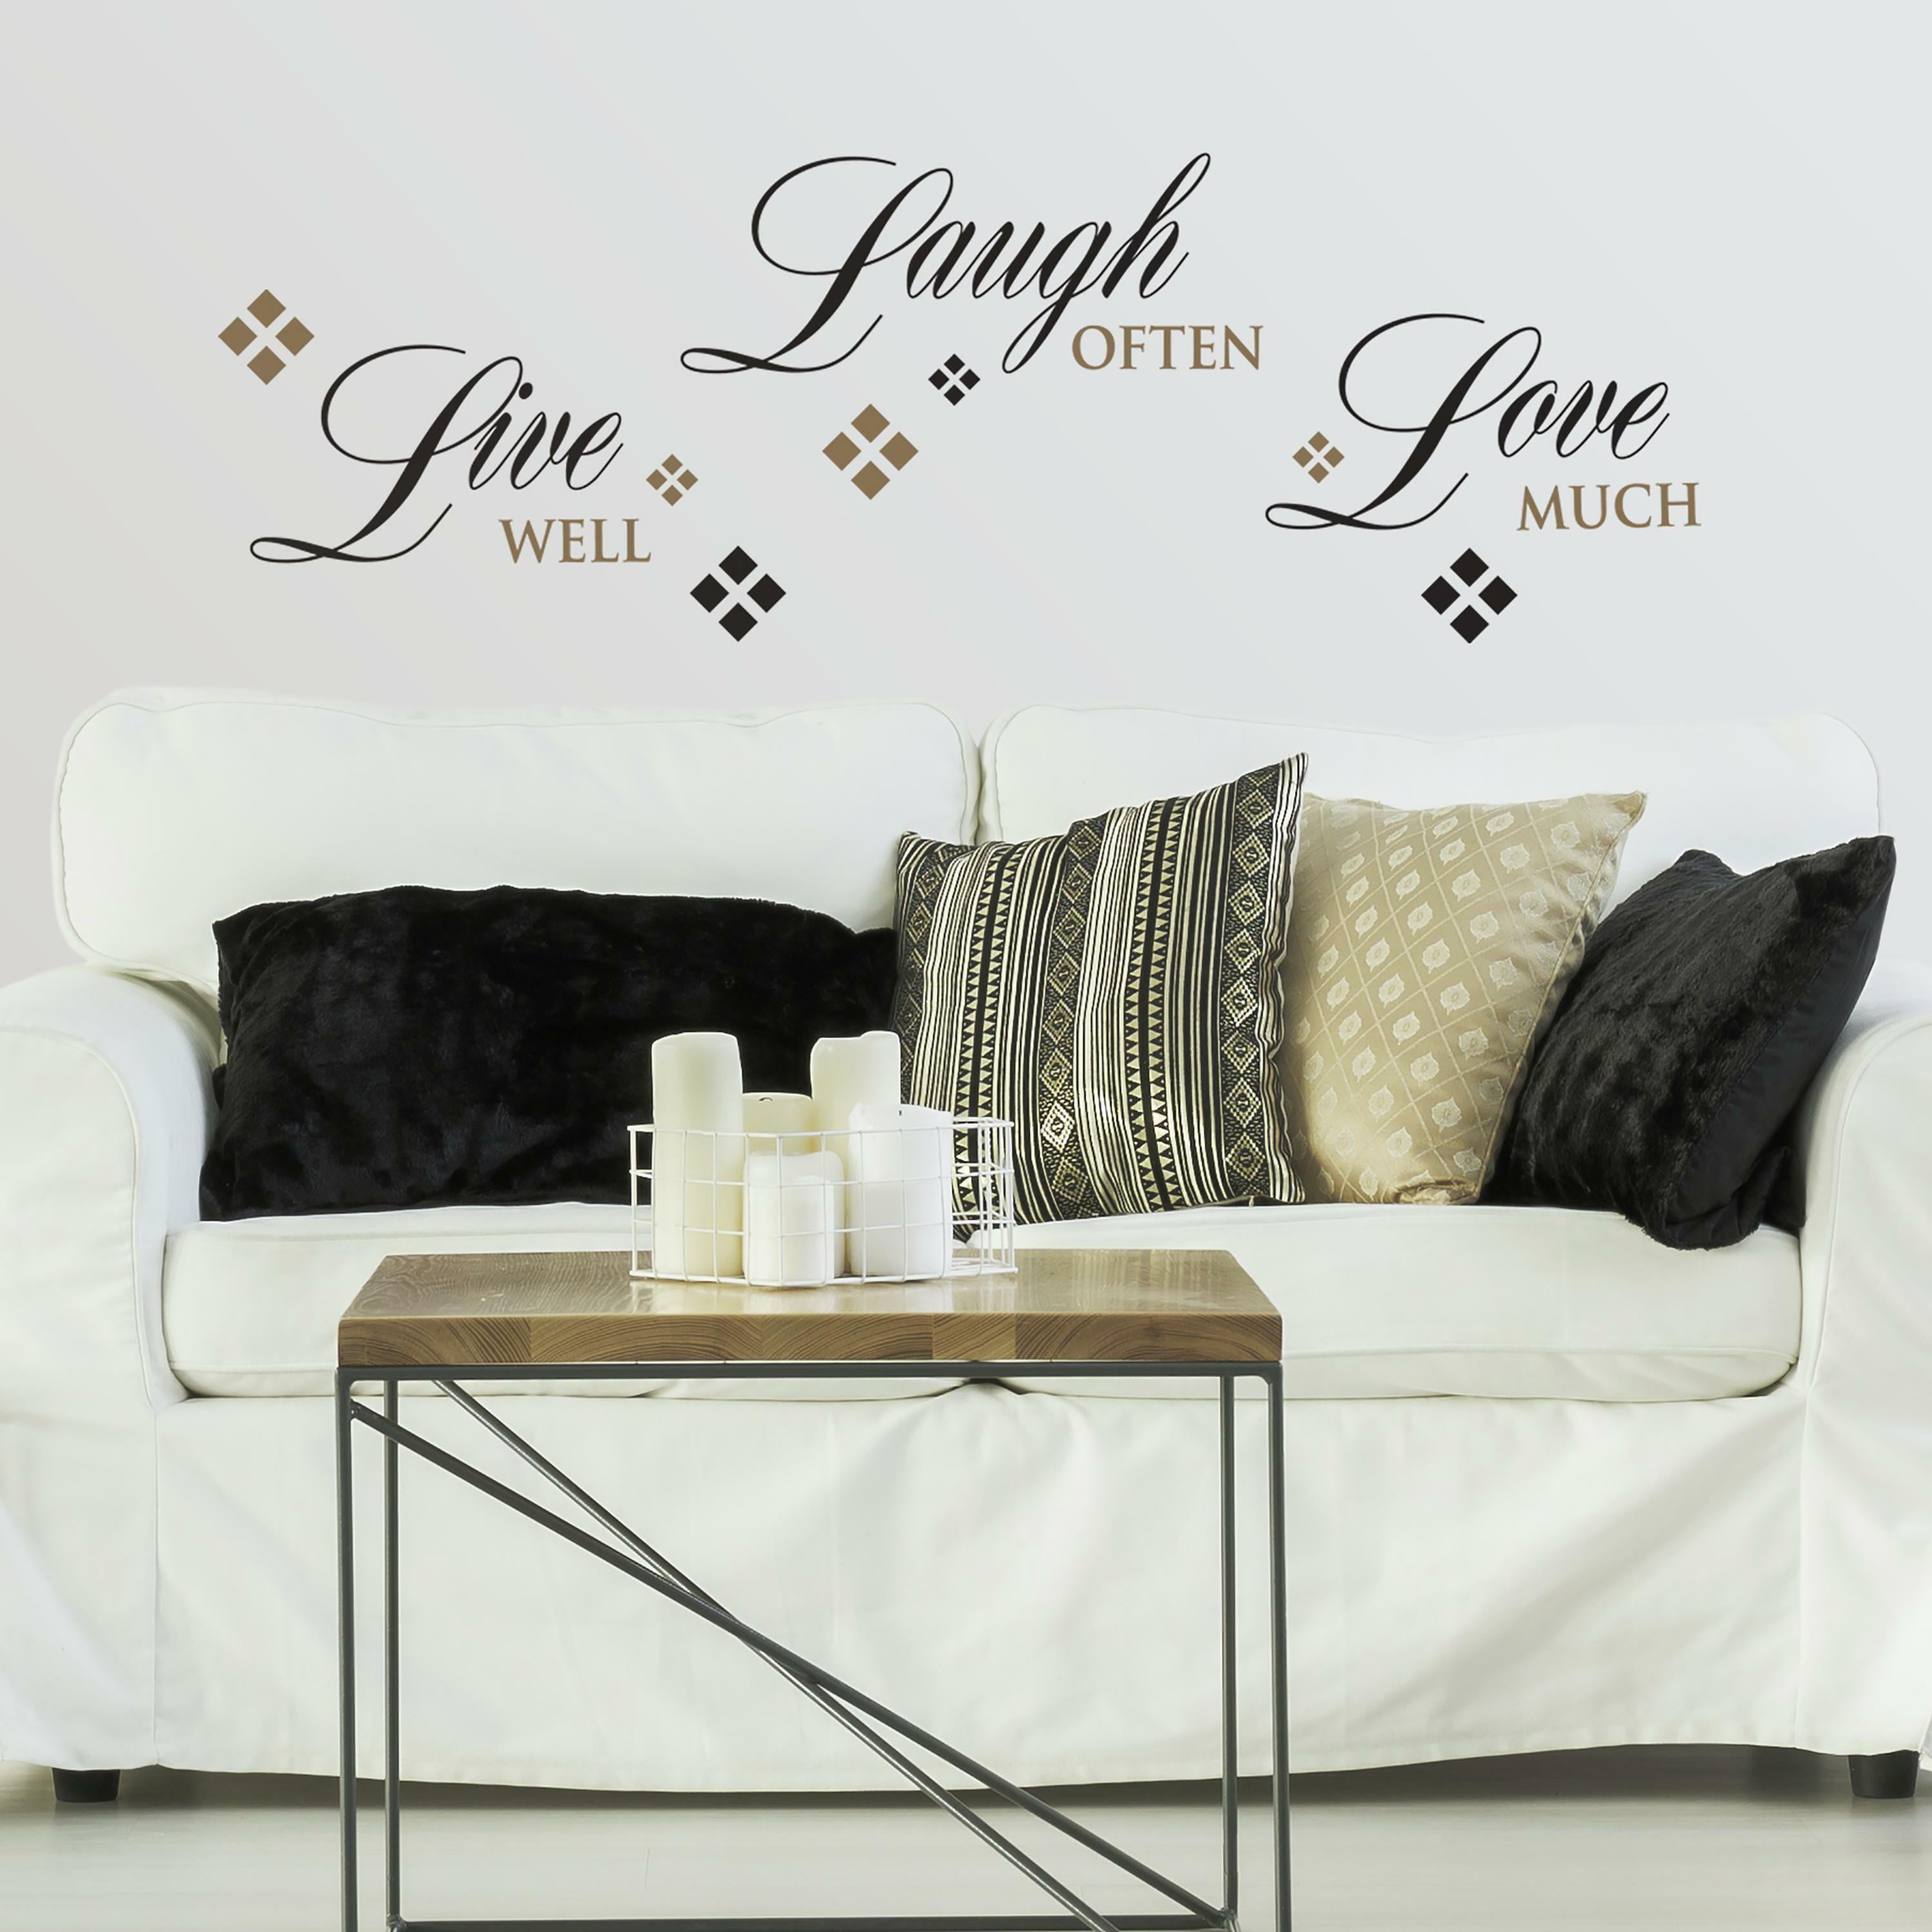 Live Laugh Love Wall Art Sticker Quote Decor Decal Vinyl Lounge Kitchen Room Bed